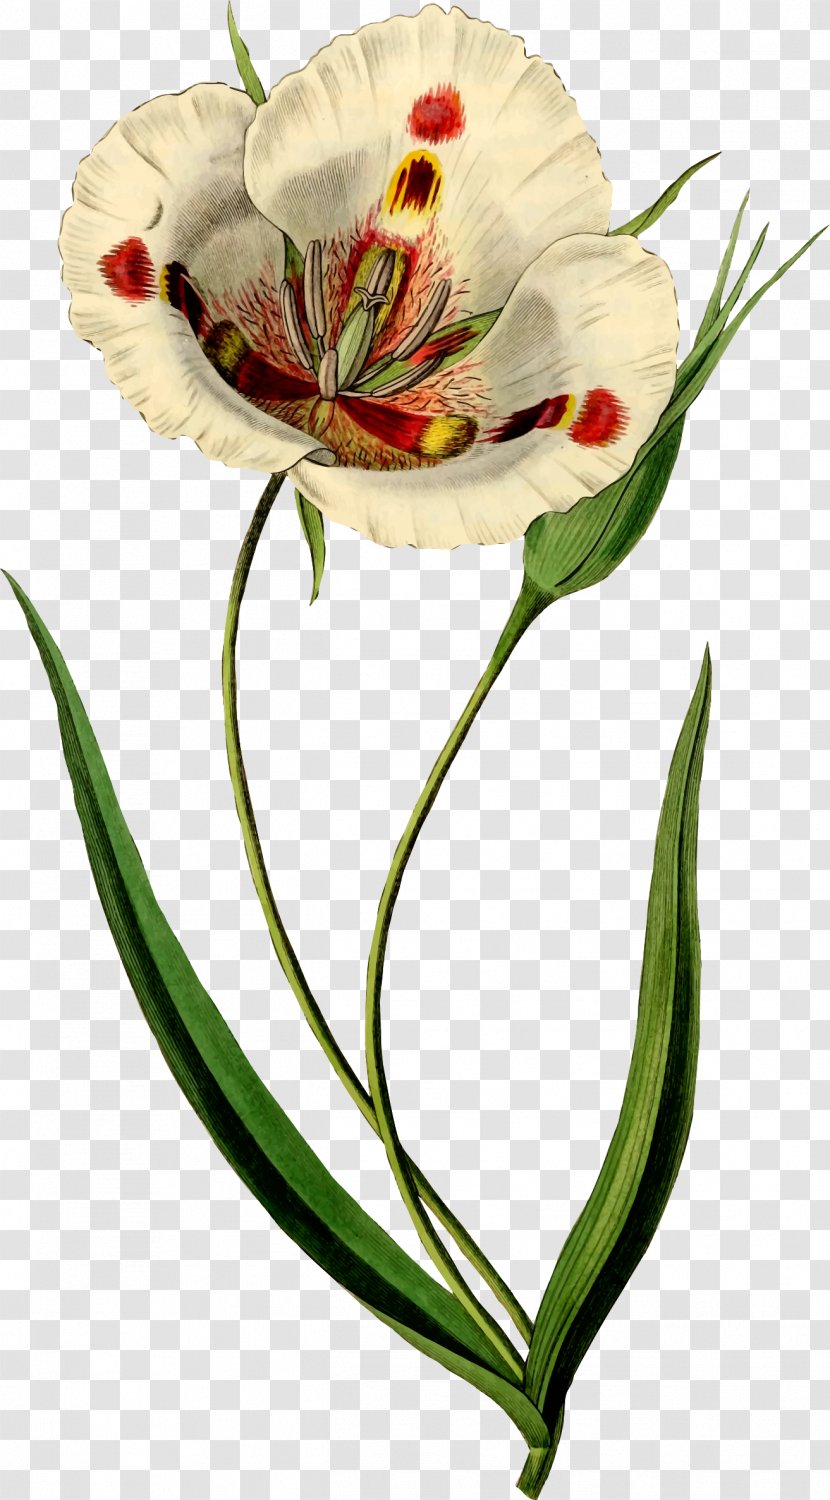 Butterfly Mariposa Lily Watercolor Painting Art Botanical Illustration - Botany Transparent PNG